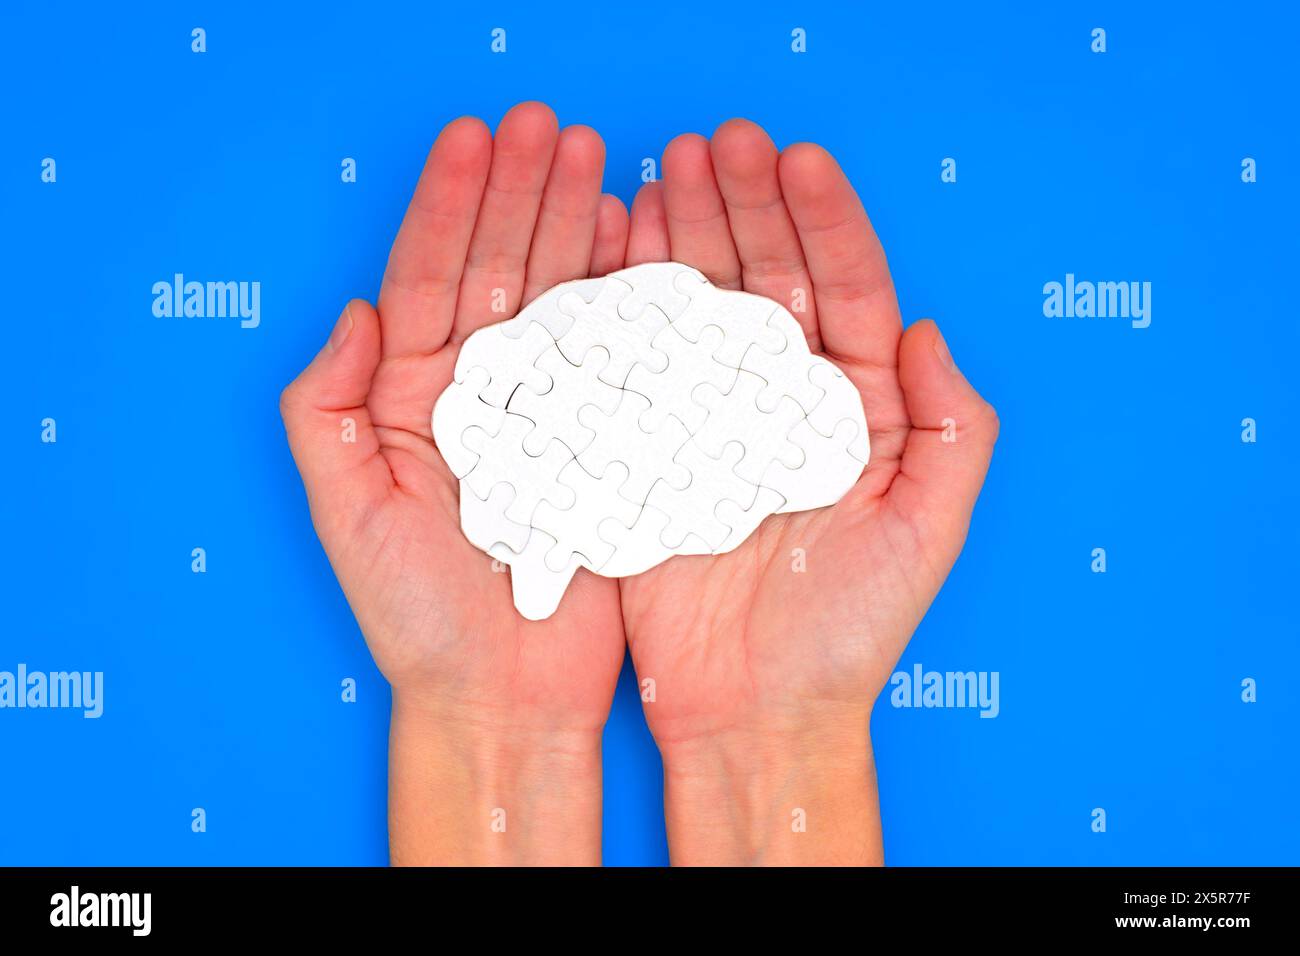 Hands holding a white puzzle piece in the shape of a brain against a vibrant blue background. Creativity, problem-solving and neuroscience related con Stock Photo